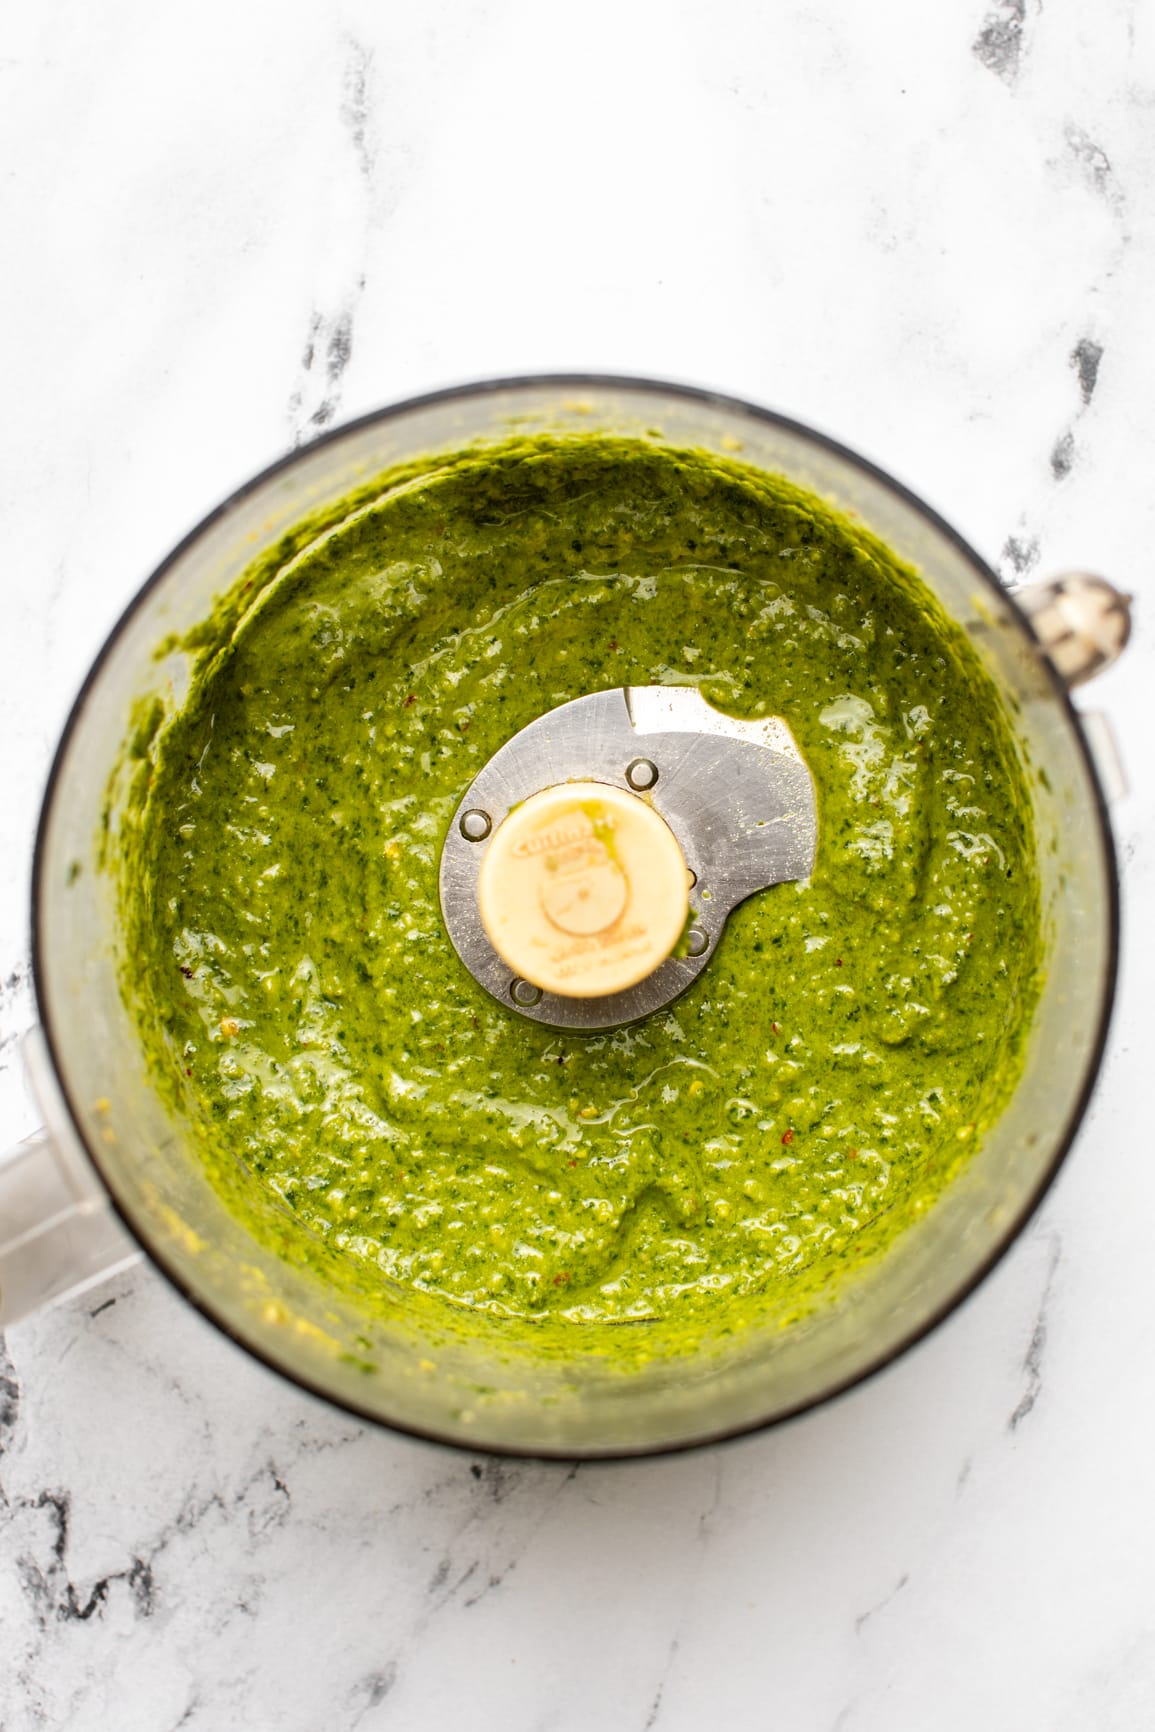 blended pesto in food processor container on marble countertop